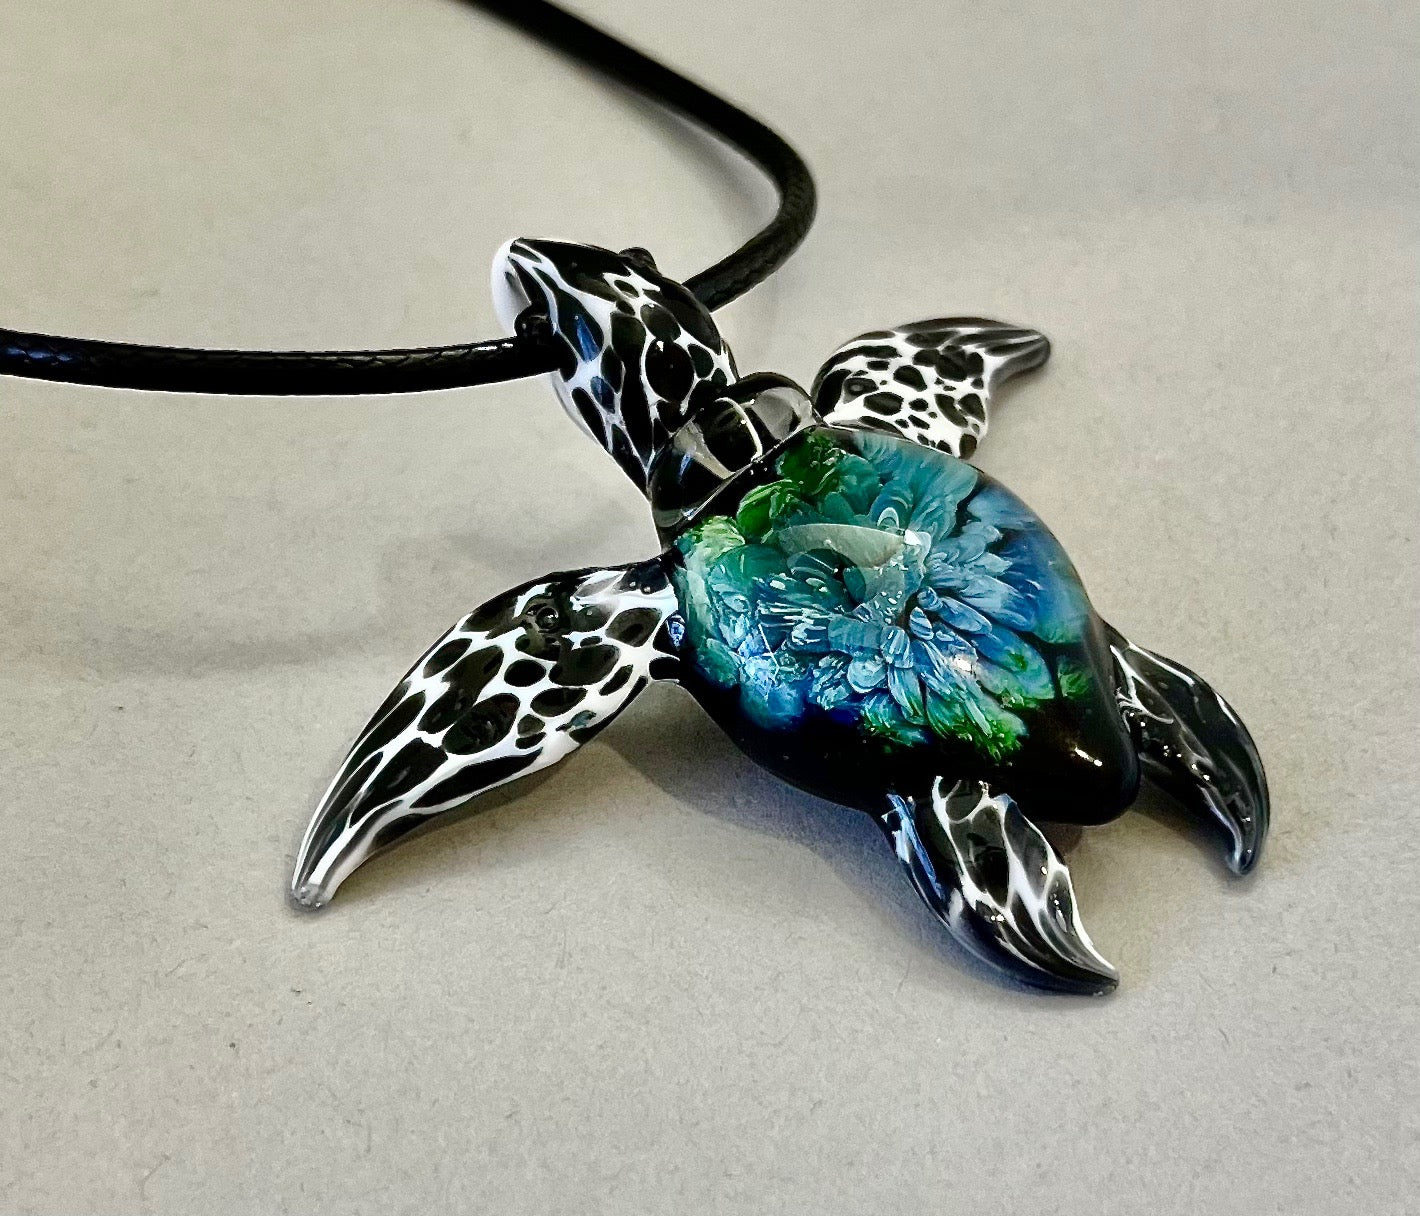 glass black and white spotted sea turtle pendant with iceberg style explosion in the shell at a 135 degree angle.